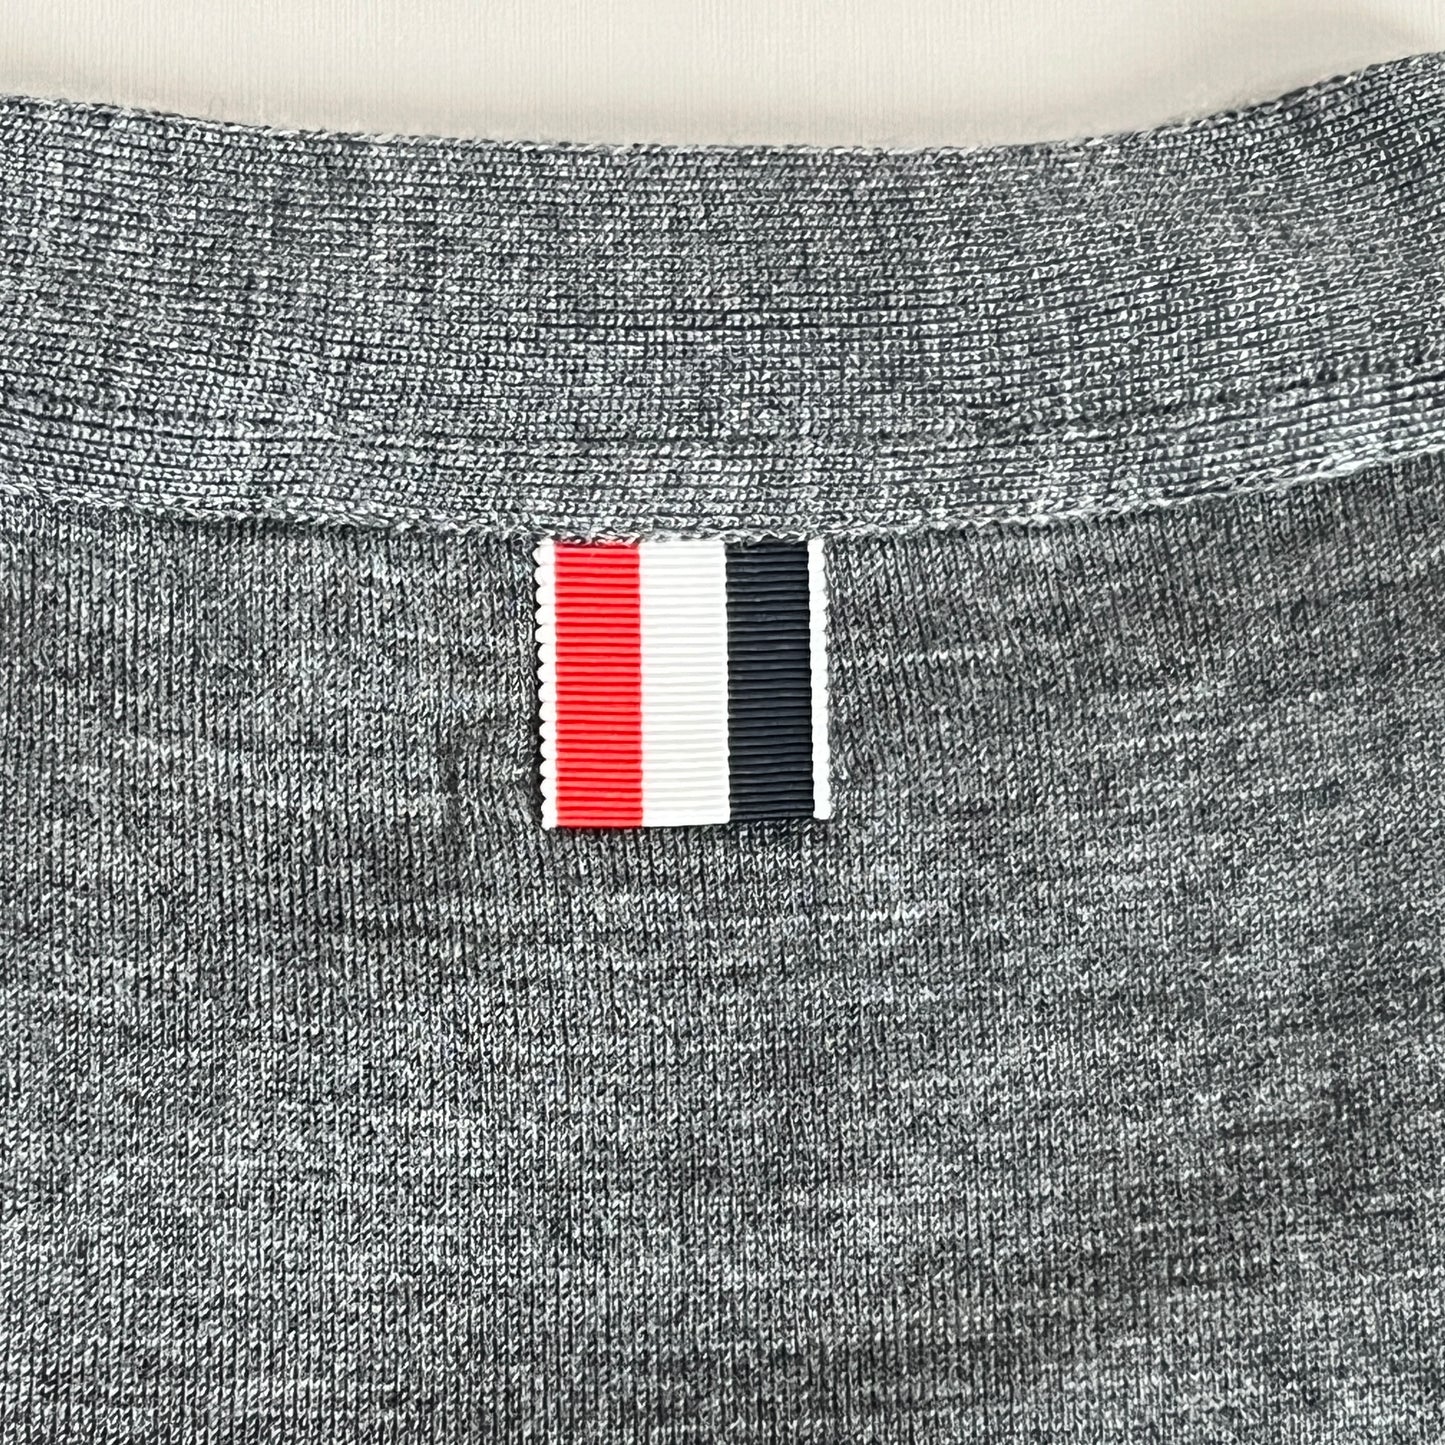 THOM BROWNE Cardigan w/ 4Bar in Sustainable Fine Merino Wool Med Grey Size 4 (New)